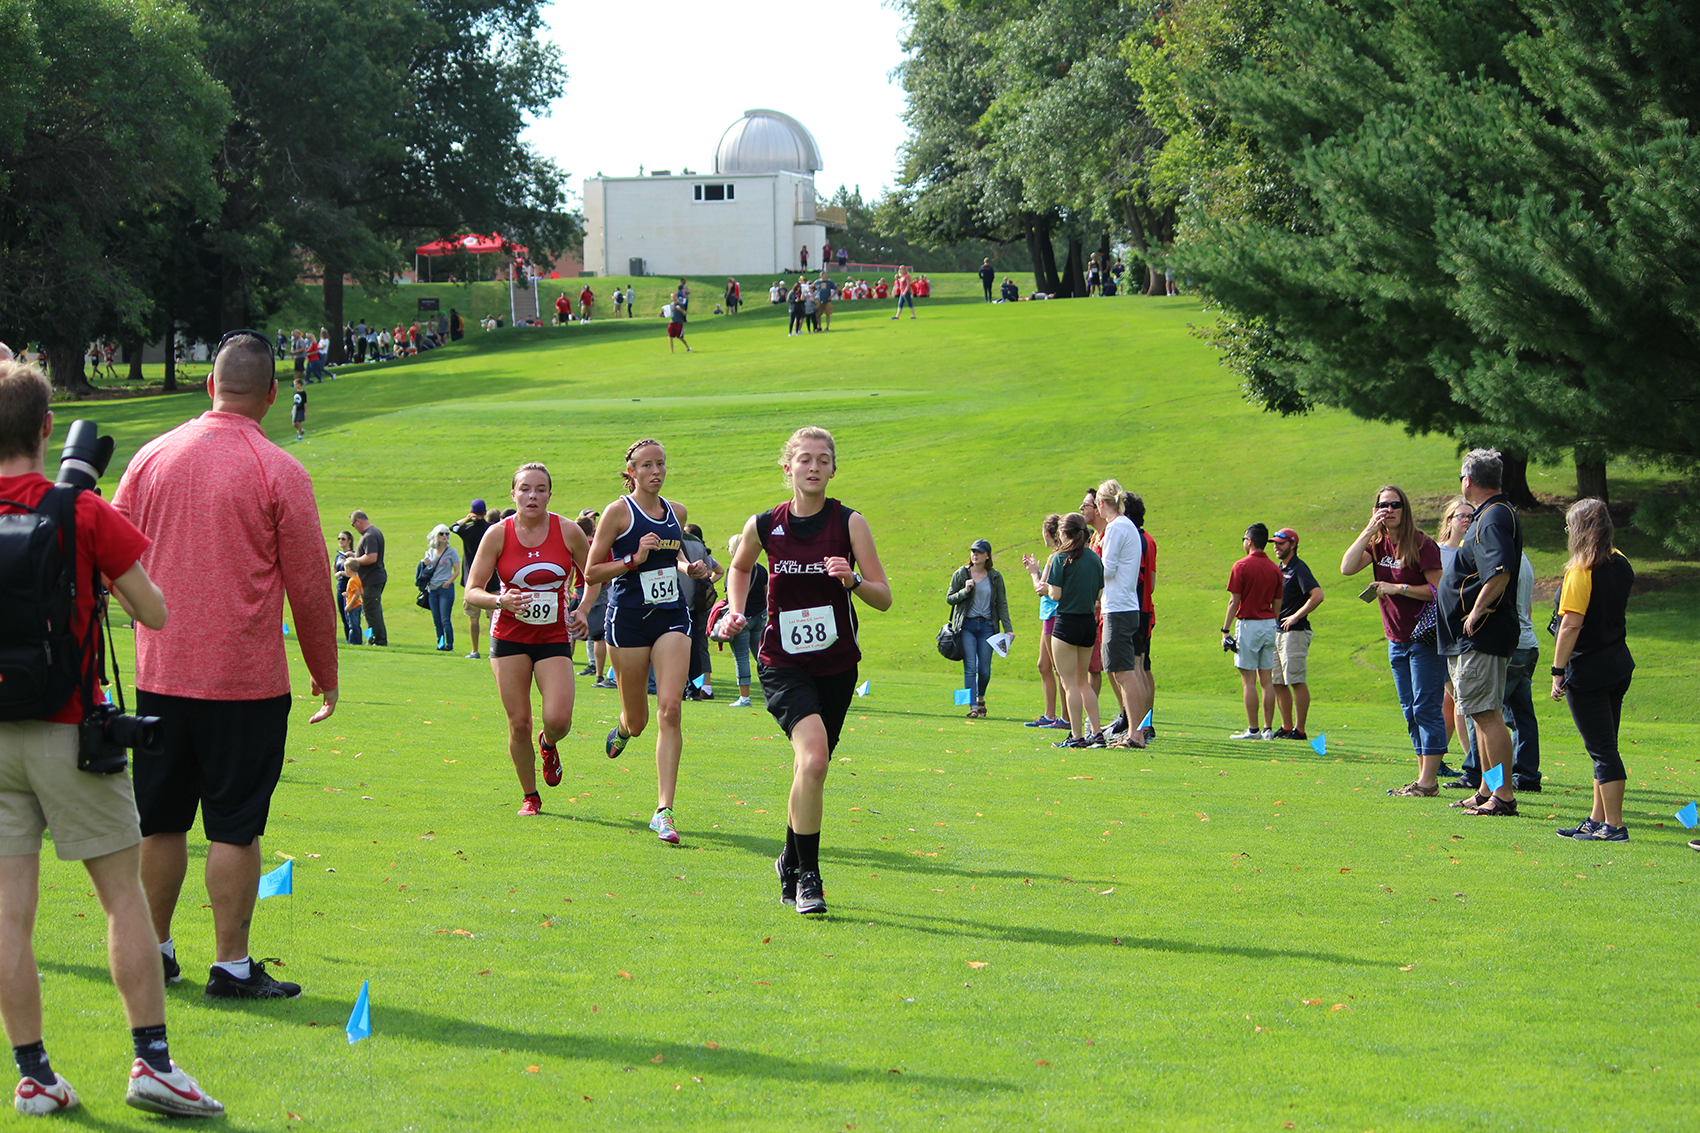 Katlyn Holaday finished in 18th place out of nearly 100 runners on Friday